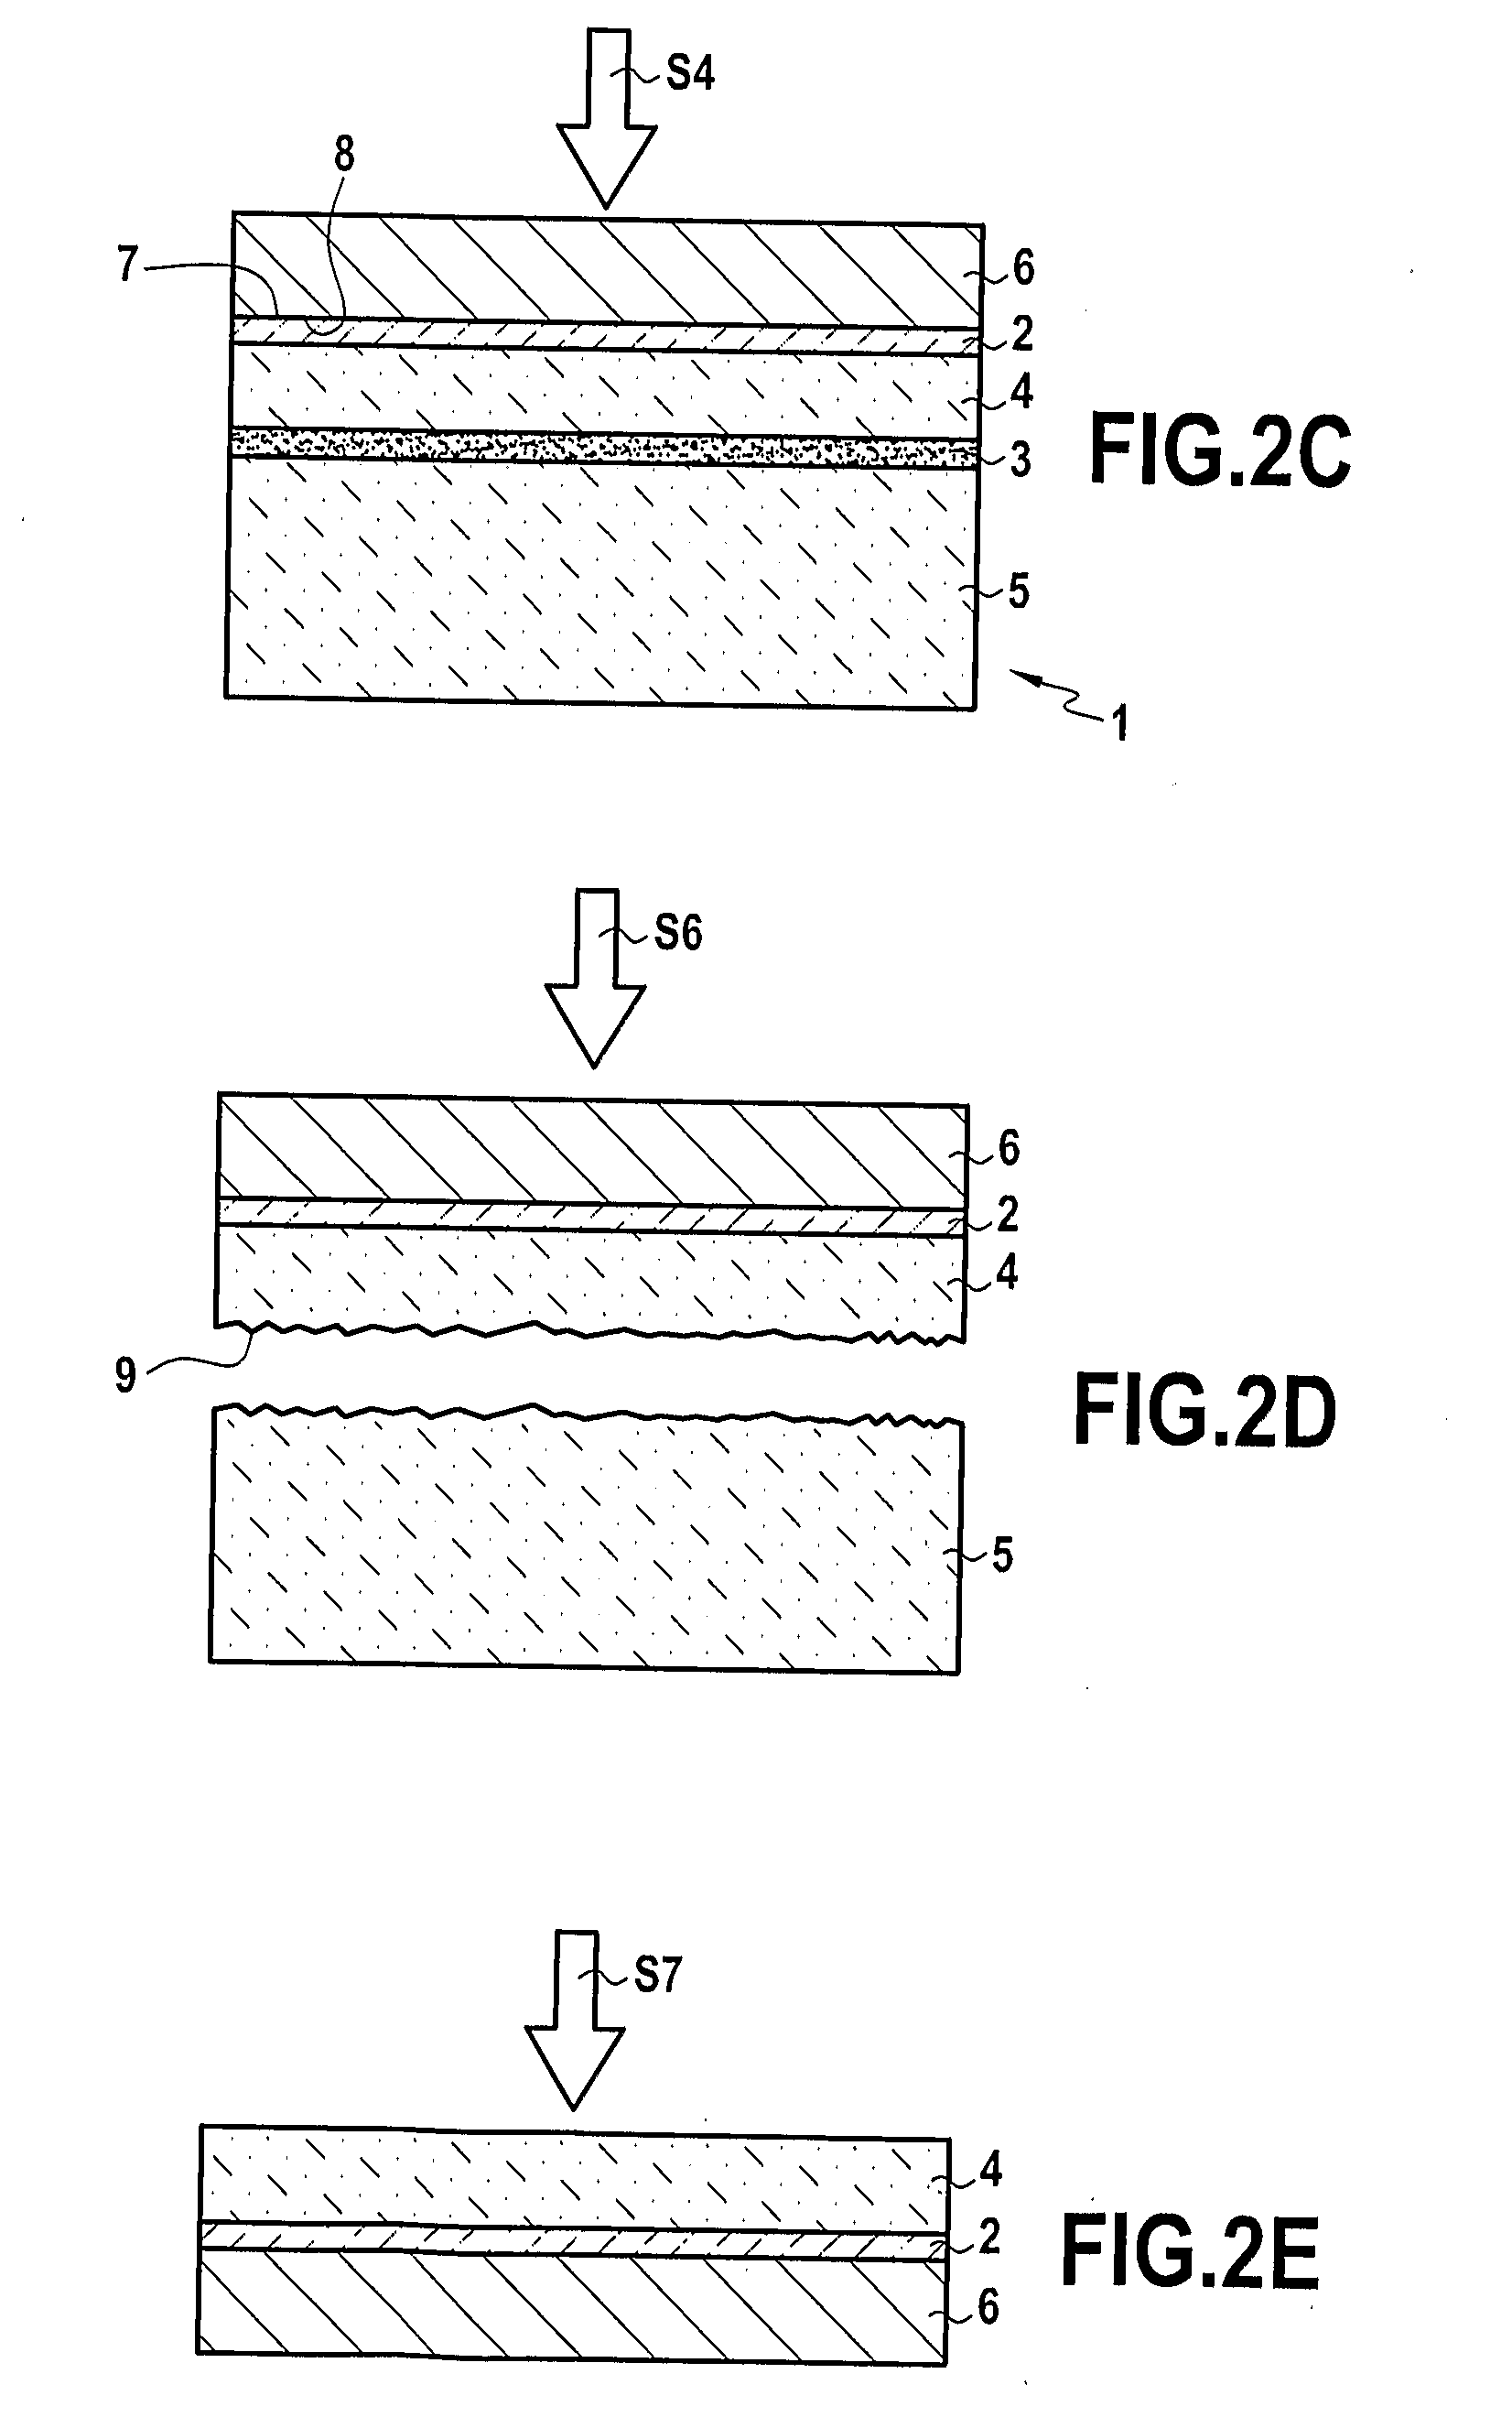 Method of producing an soi structure with an insulating layer of controlled thickness